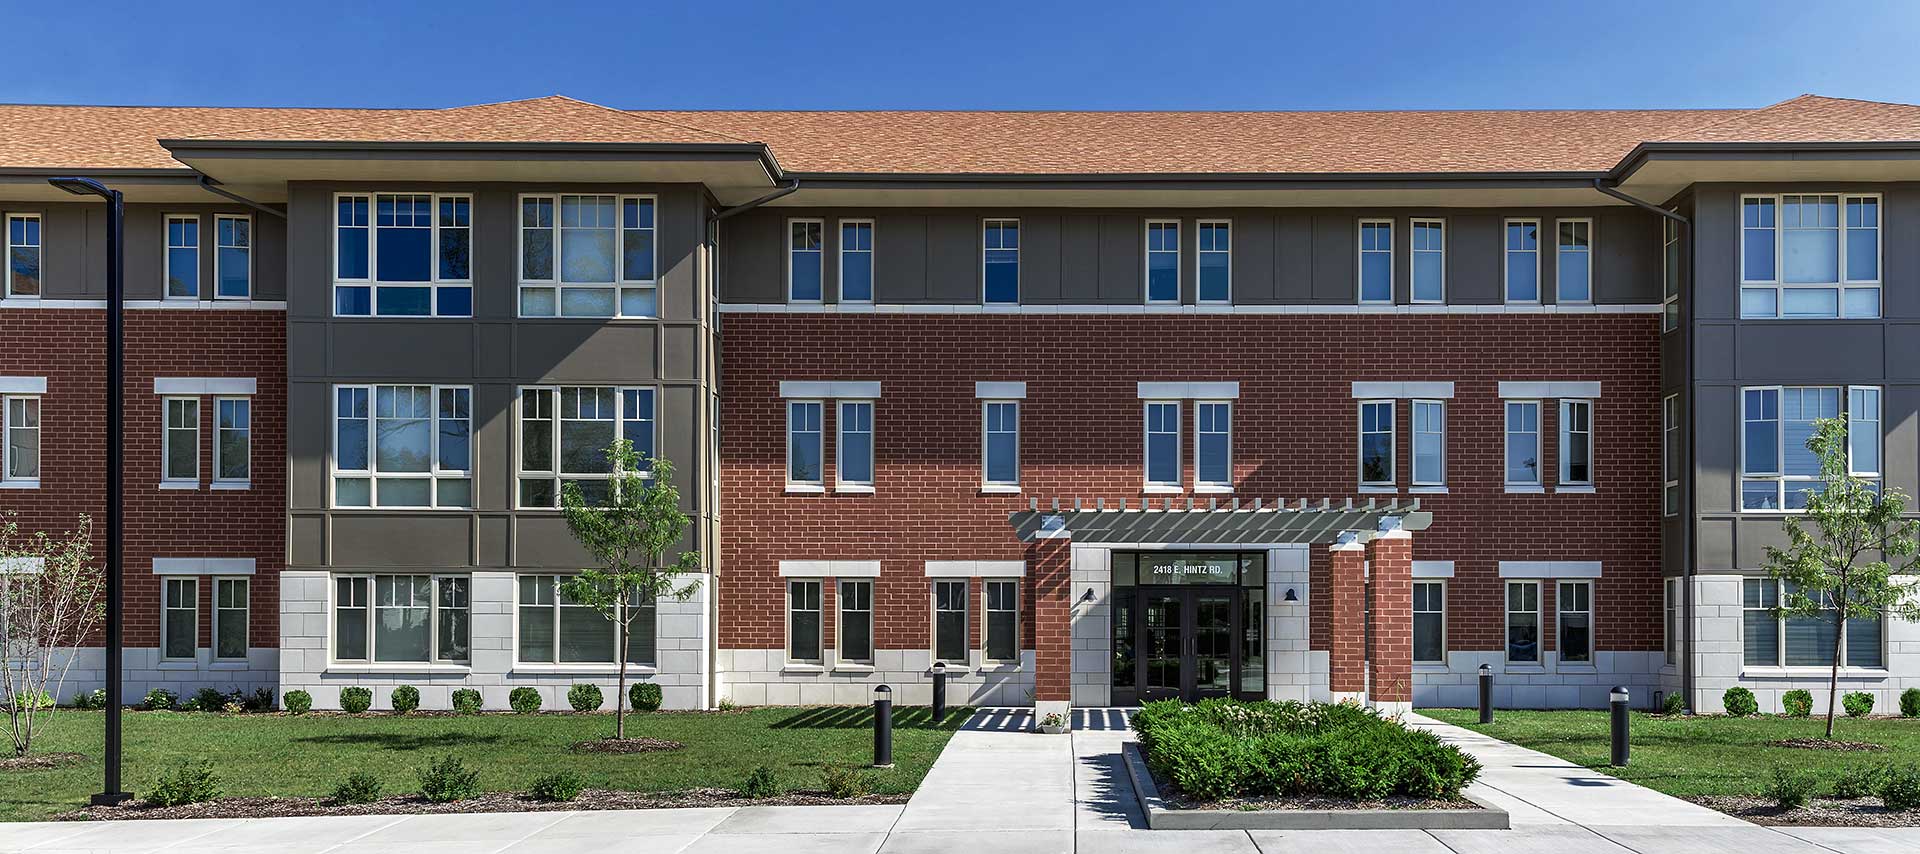 Exterior of PhilHaven affordable and supportive living residence